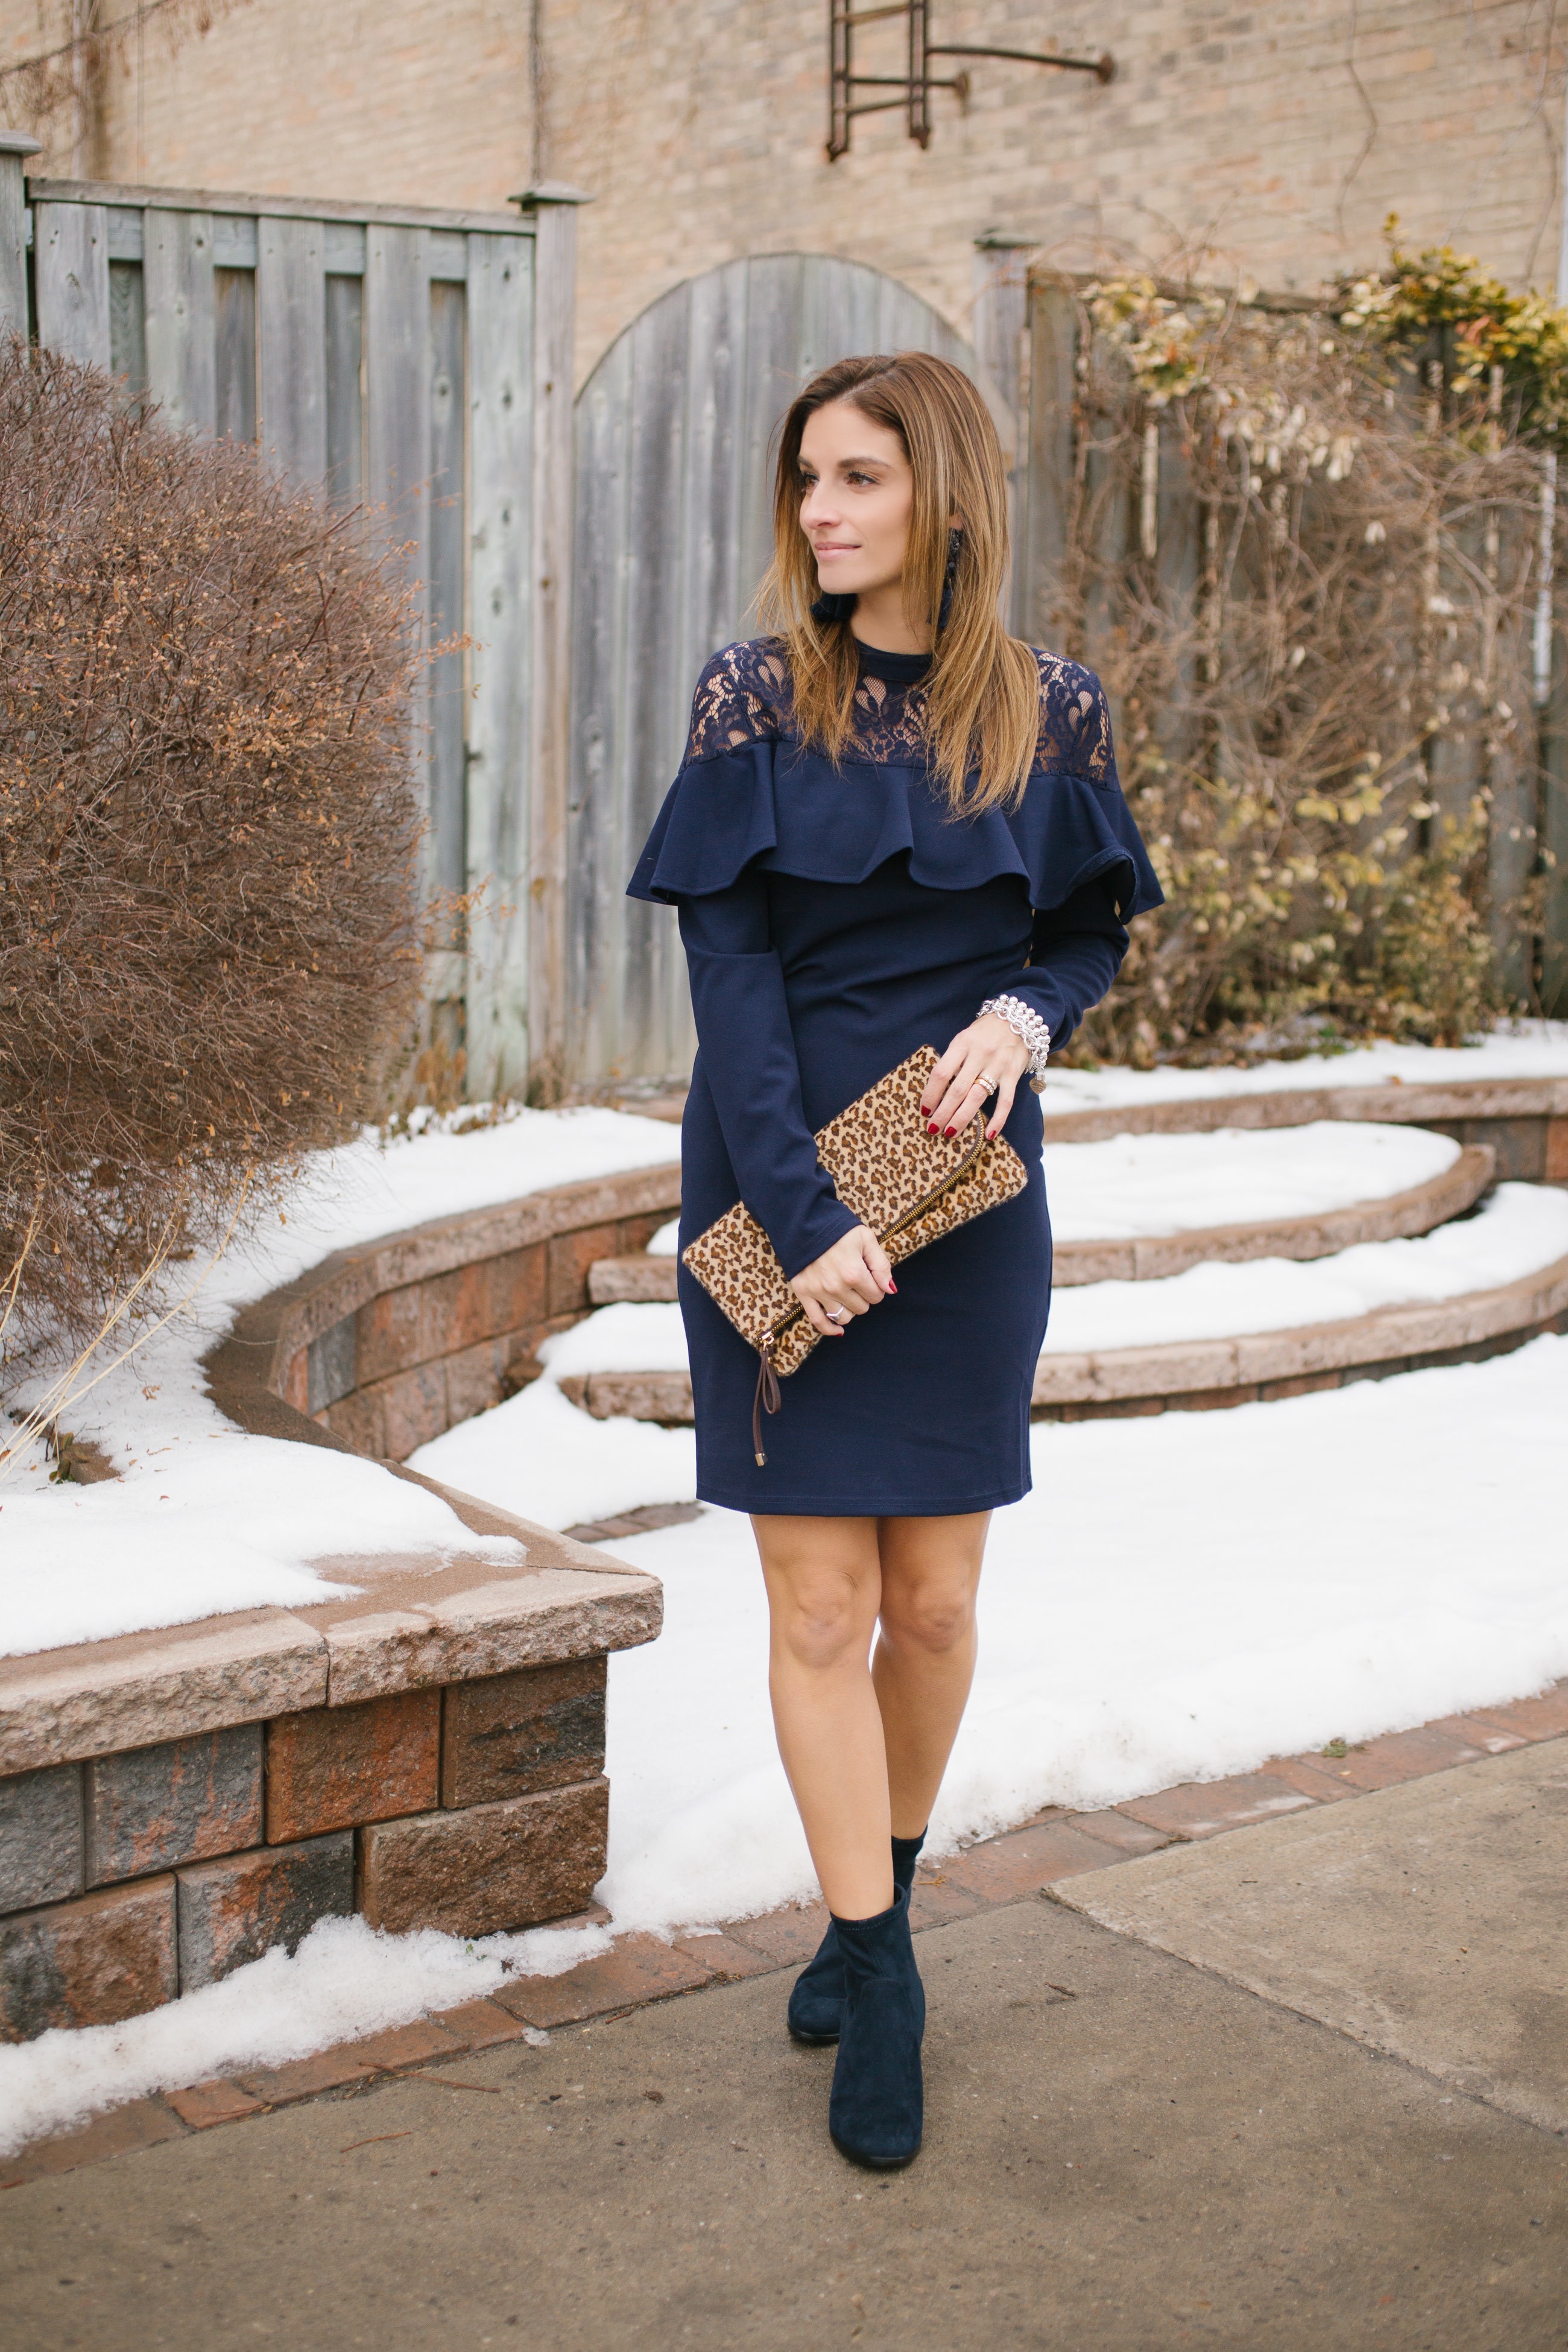 Navy Dress long sleeve dress with a frill, tassel earrings, blue velvet boots and leopard clutch - perfect winter look!